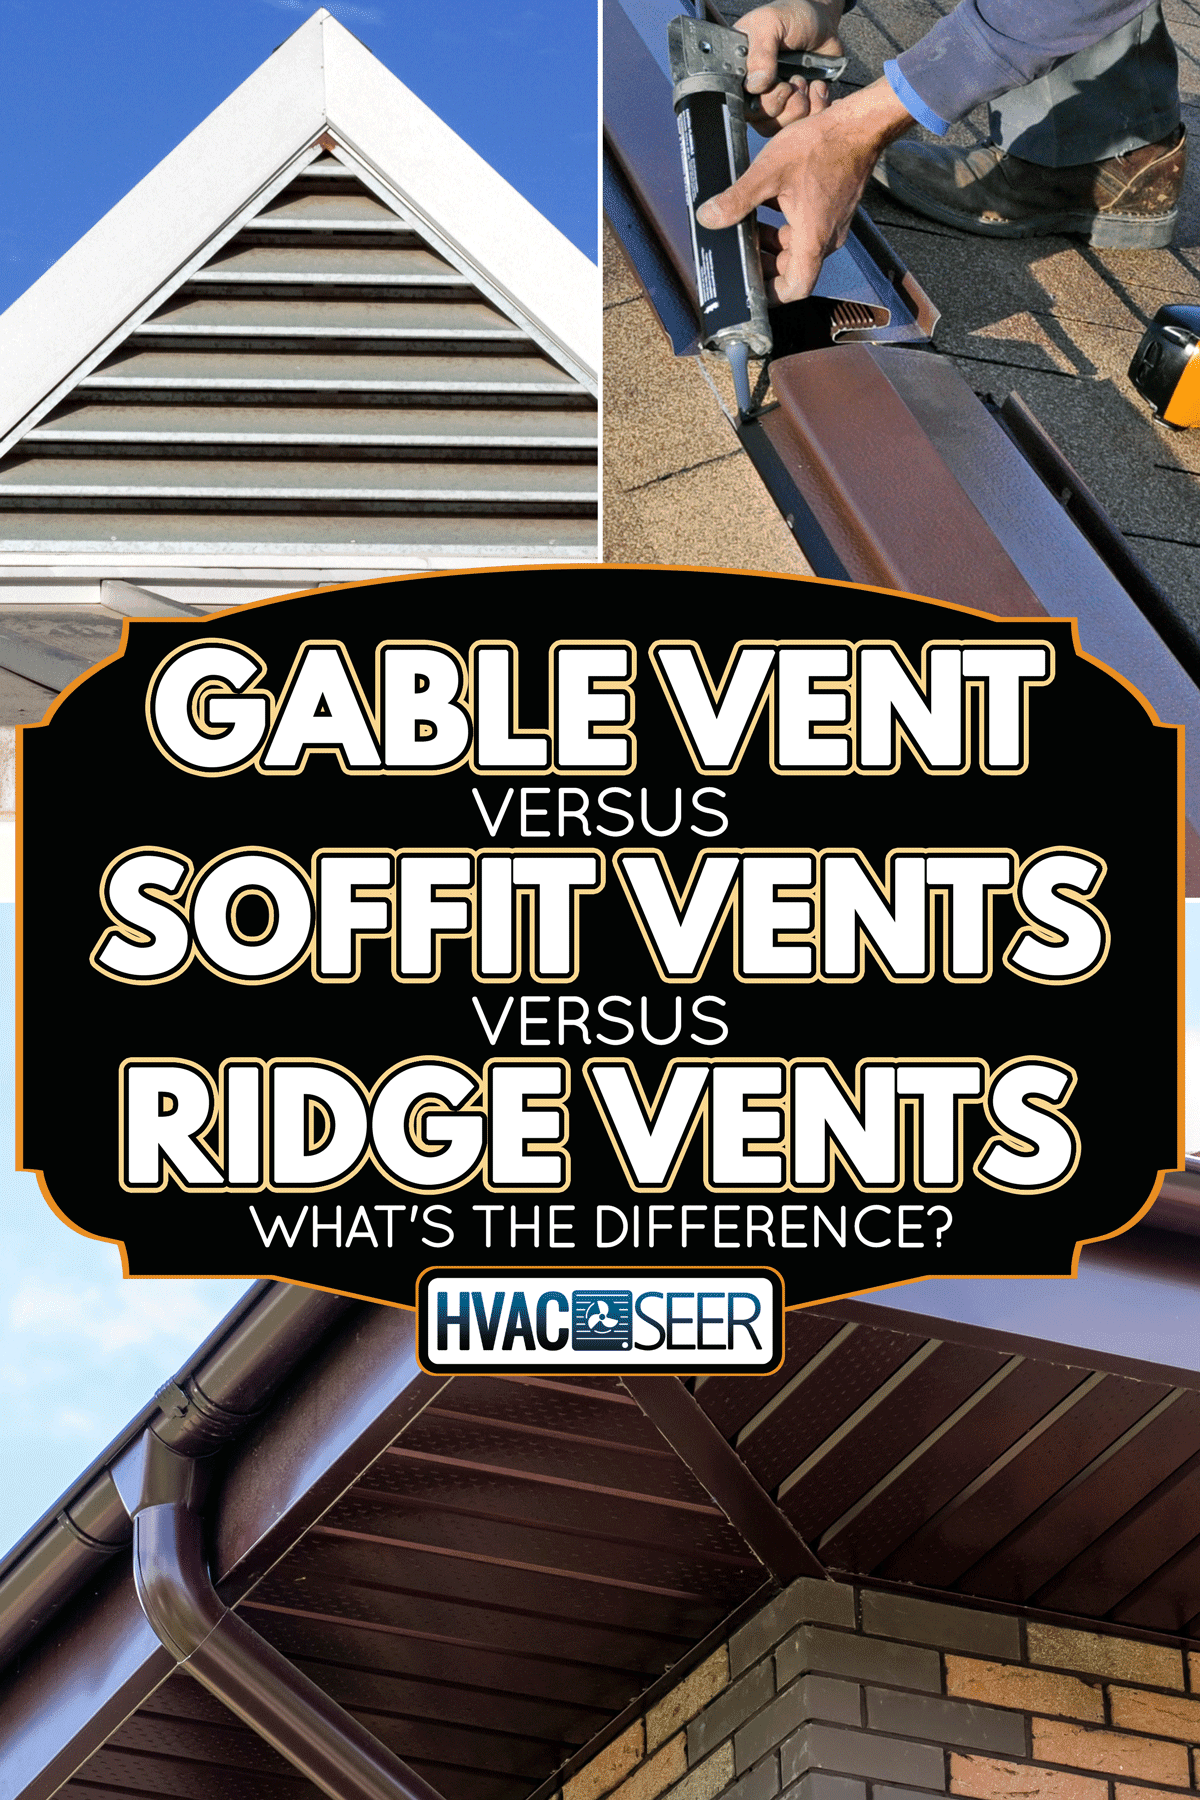 Comparison between gable vent, soffit vents and ridge vents, Gable Vent Vs. Soffit Vents Vs. Ridge Vents: What's The Difference?